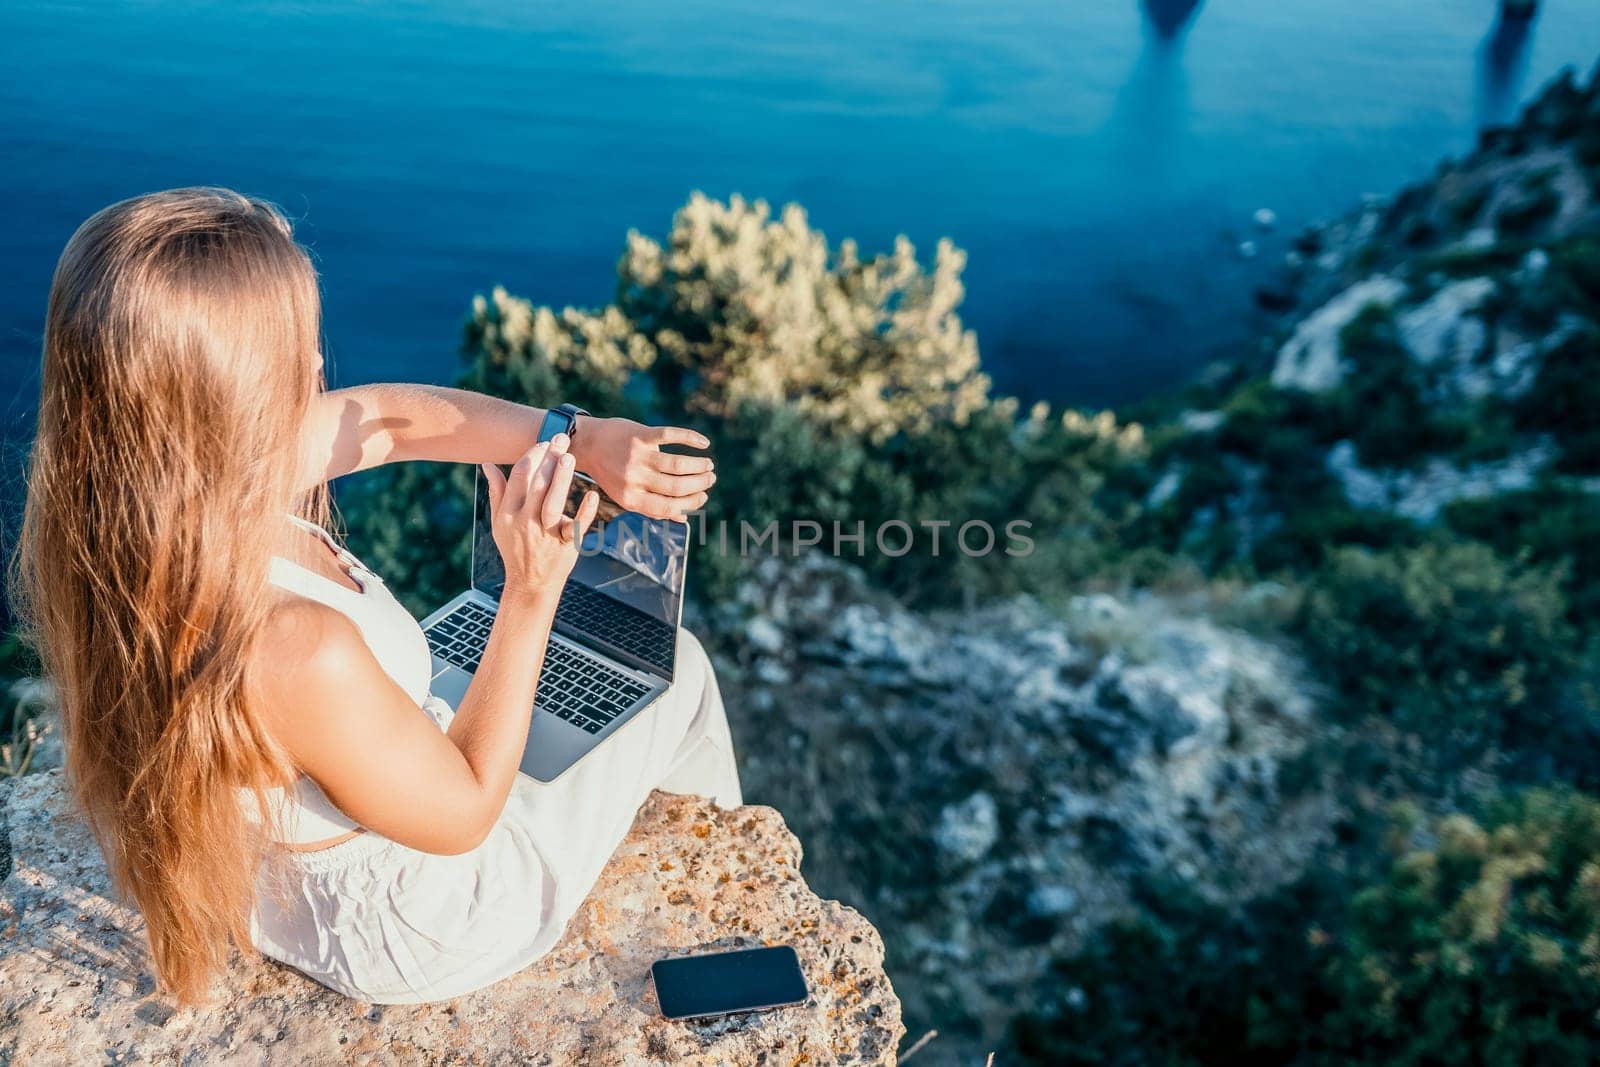 Digital nomad, Business woman working on laptop by the sea. Pretty lady typing on computer by the sea at sunset, makes a business transaction online from a distance. Freelance, remote work on vacation by panophotograph